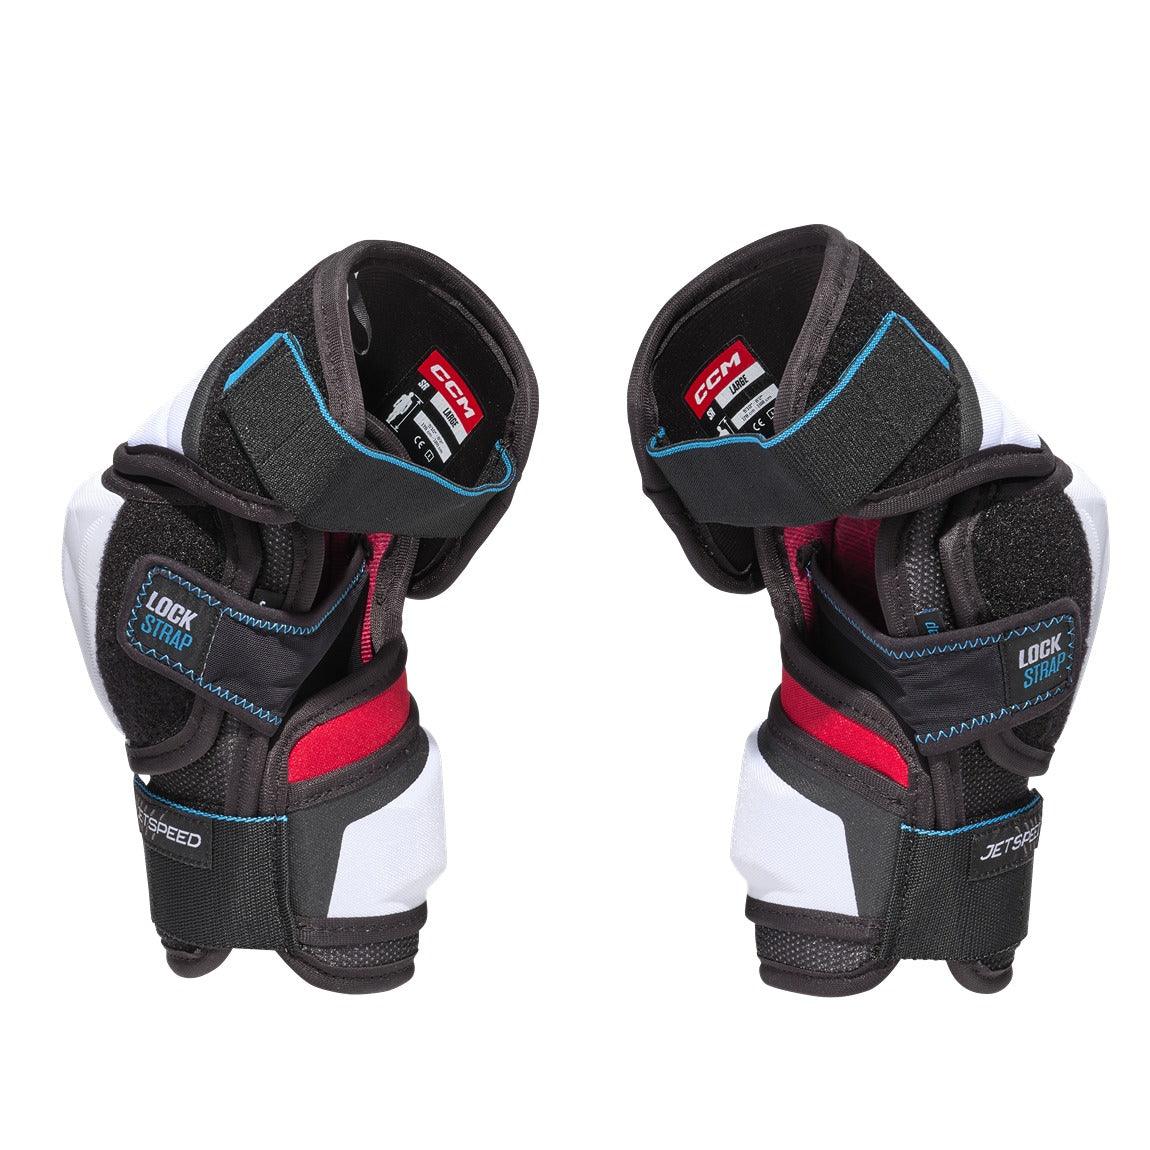 Jetspeed FT680 Elbow Pads - Senior - Sports Excellence